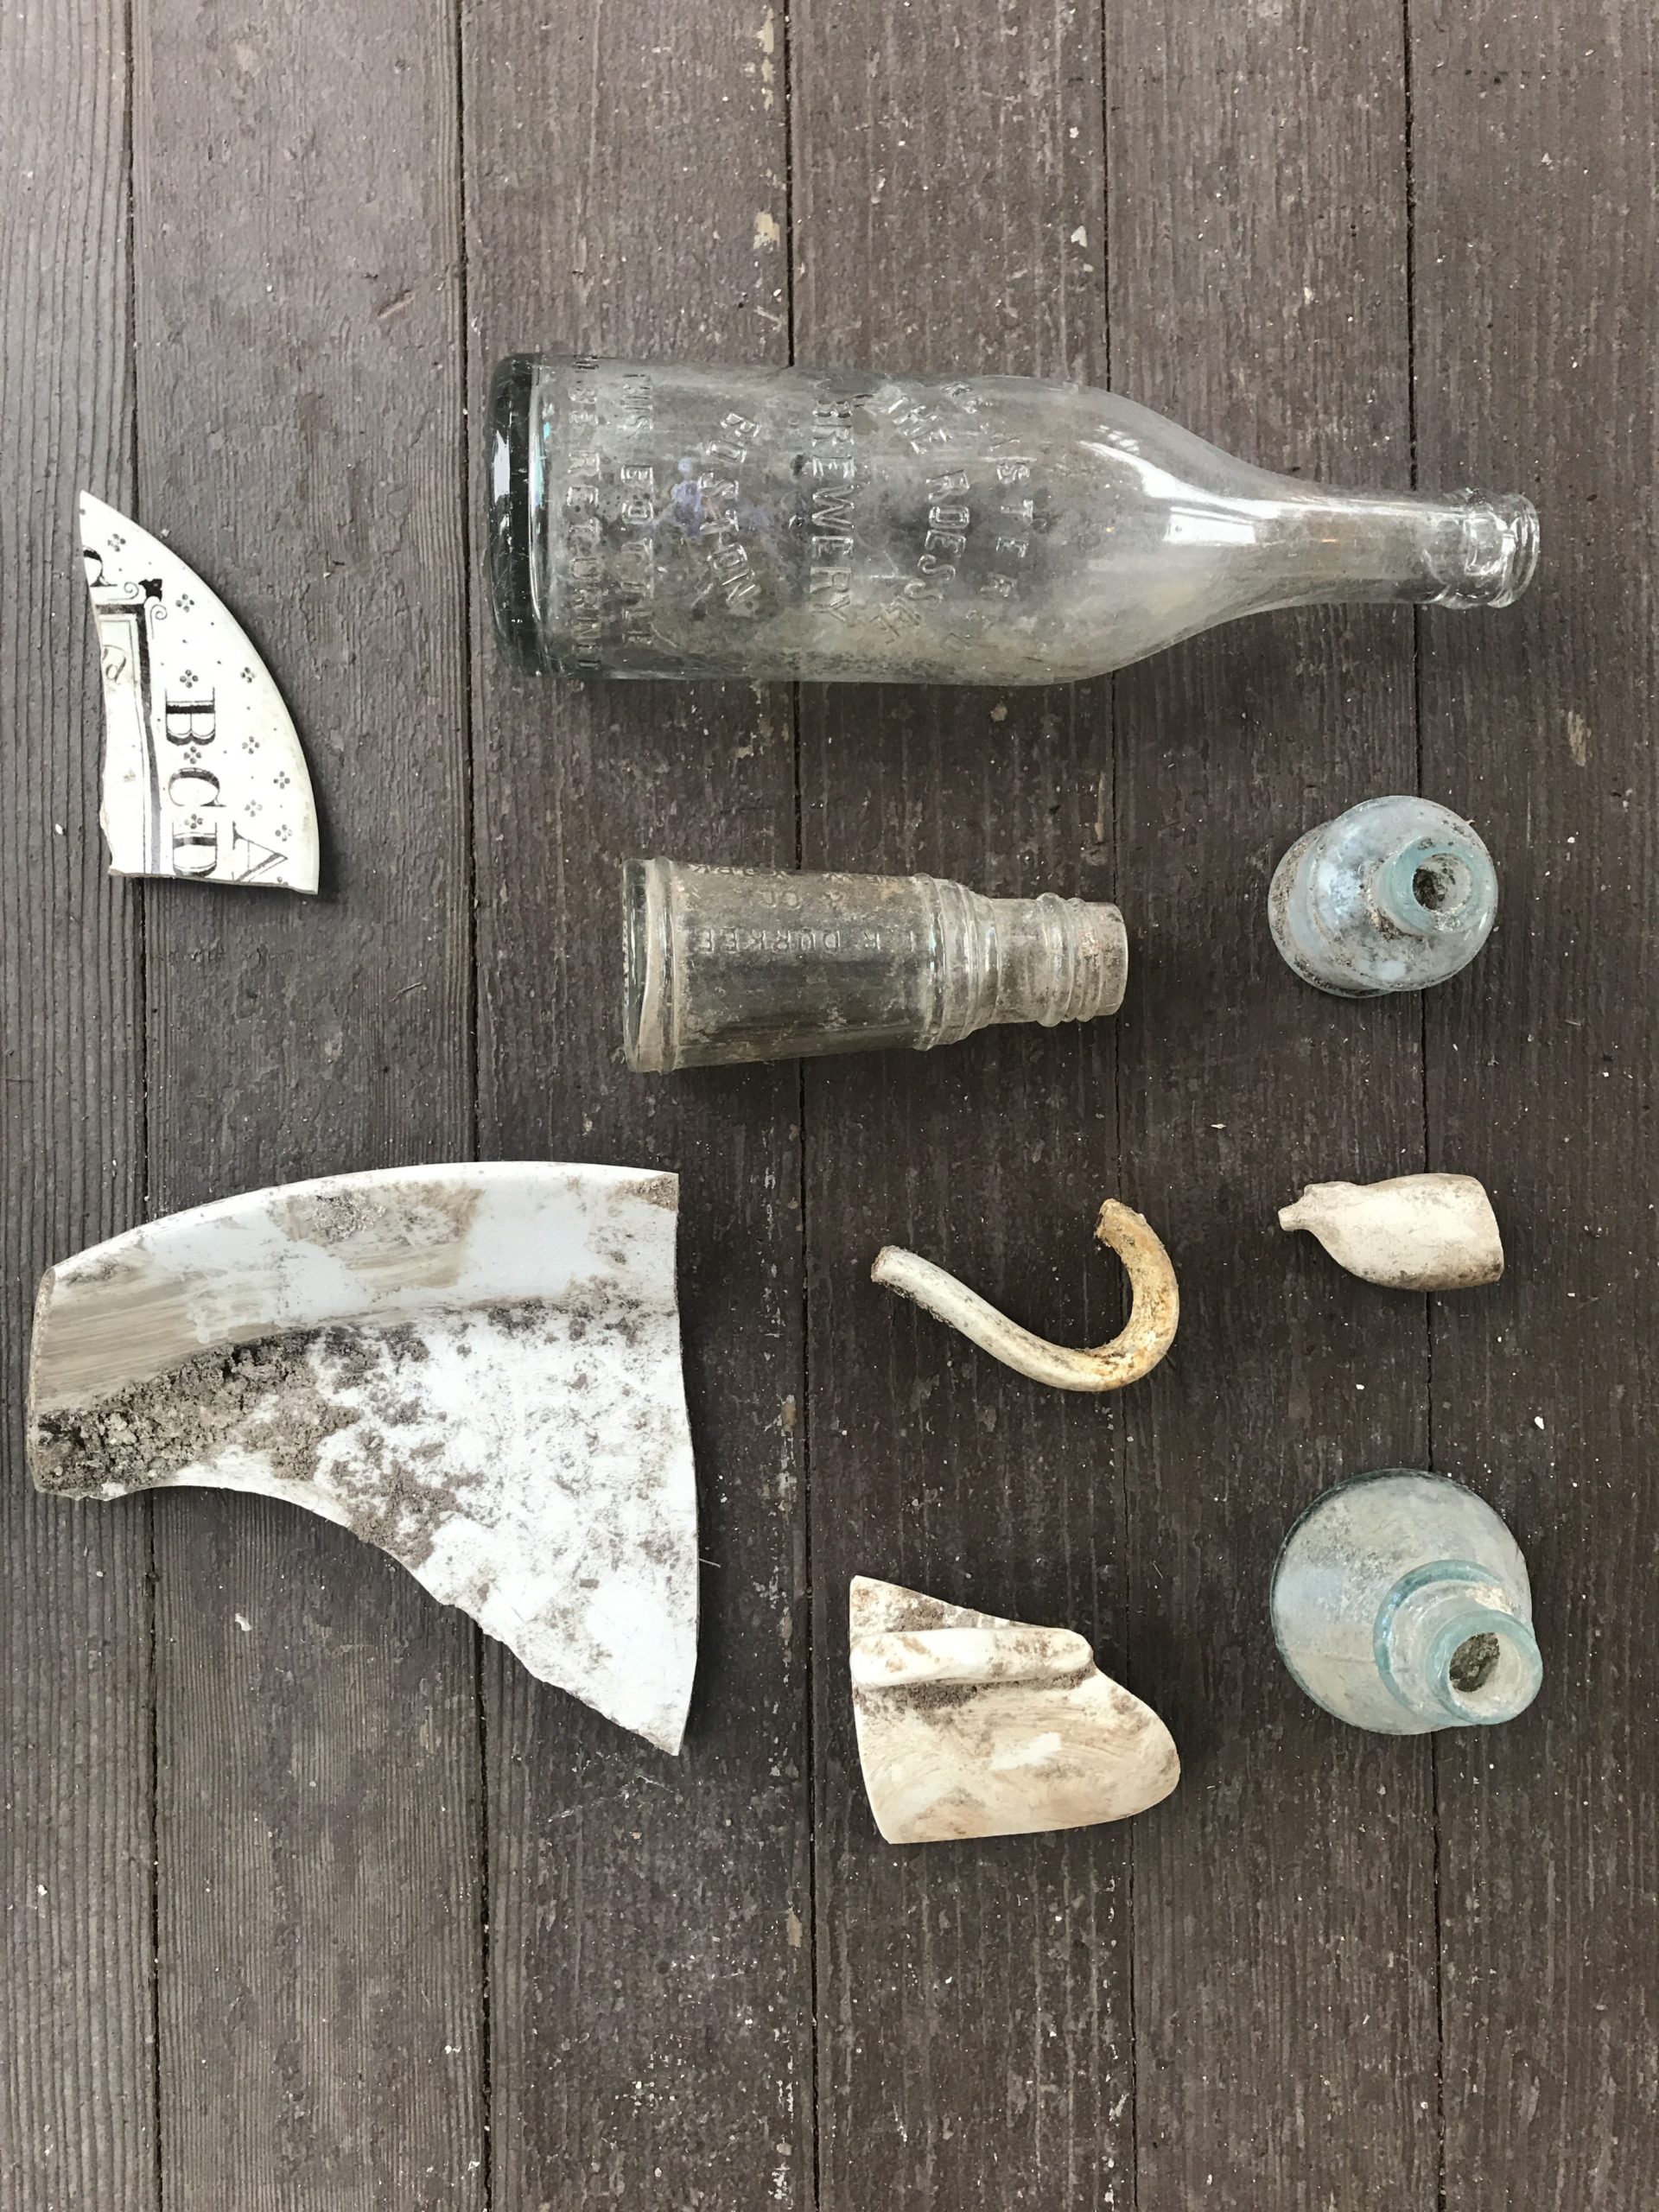 A sampling of interesting artifacts the team has found while digging.